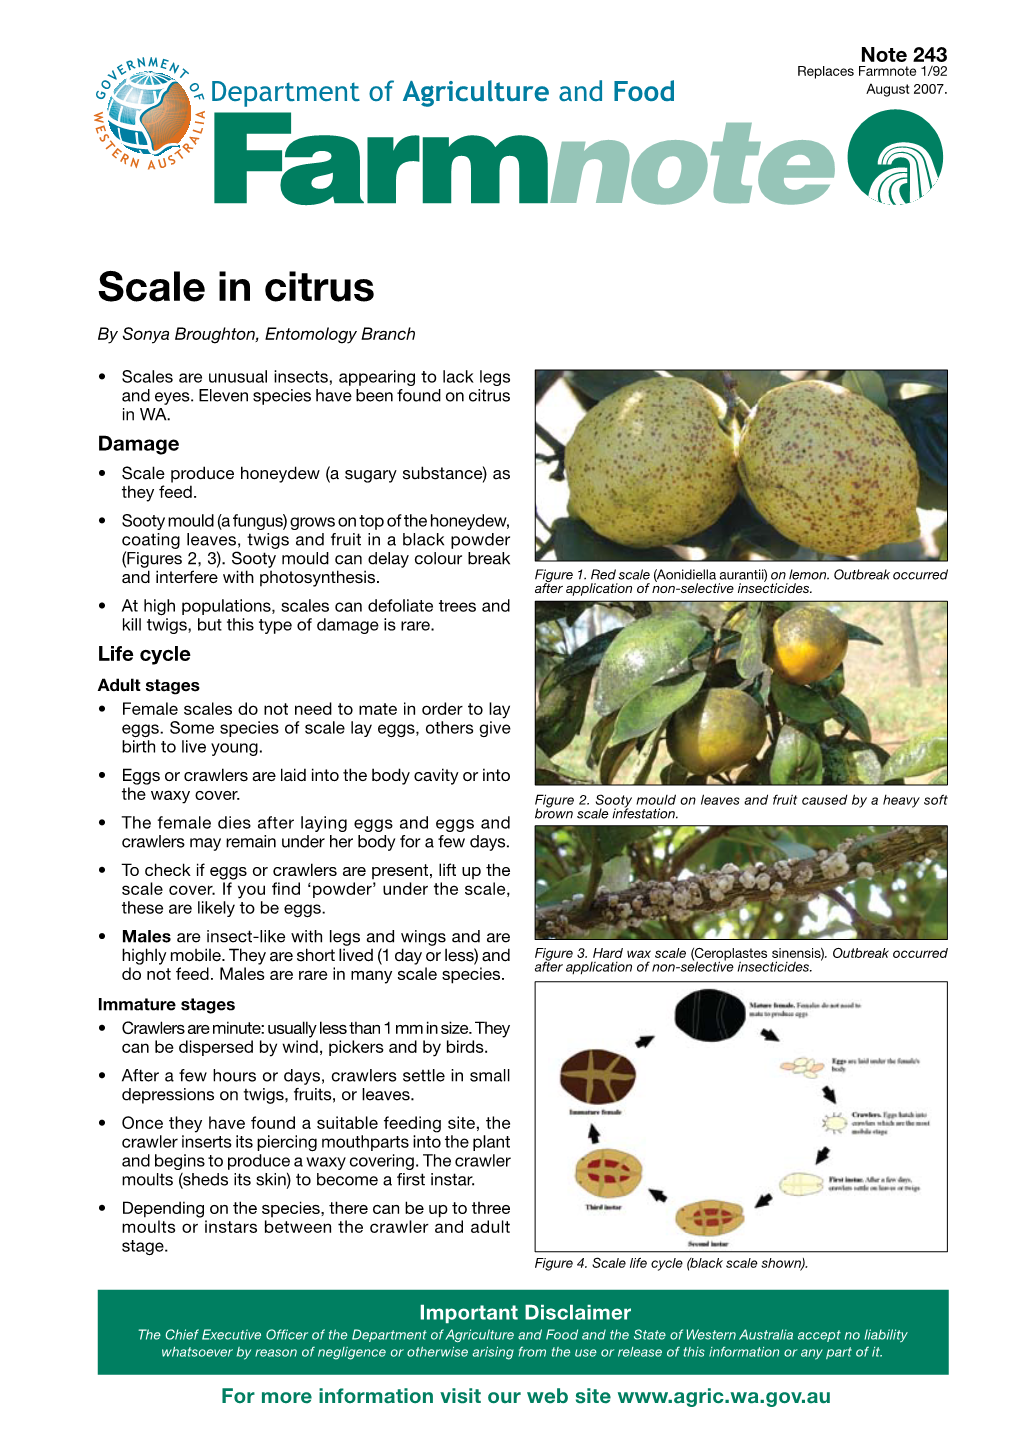 Scale in Citrus by Sonya Broughton, Entomology Branch